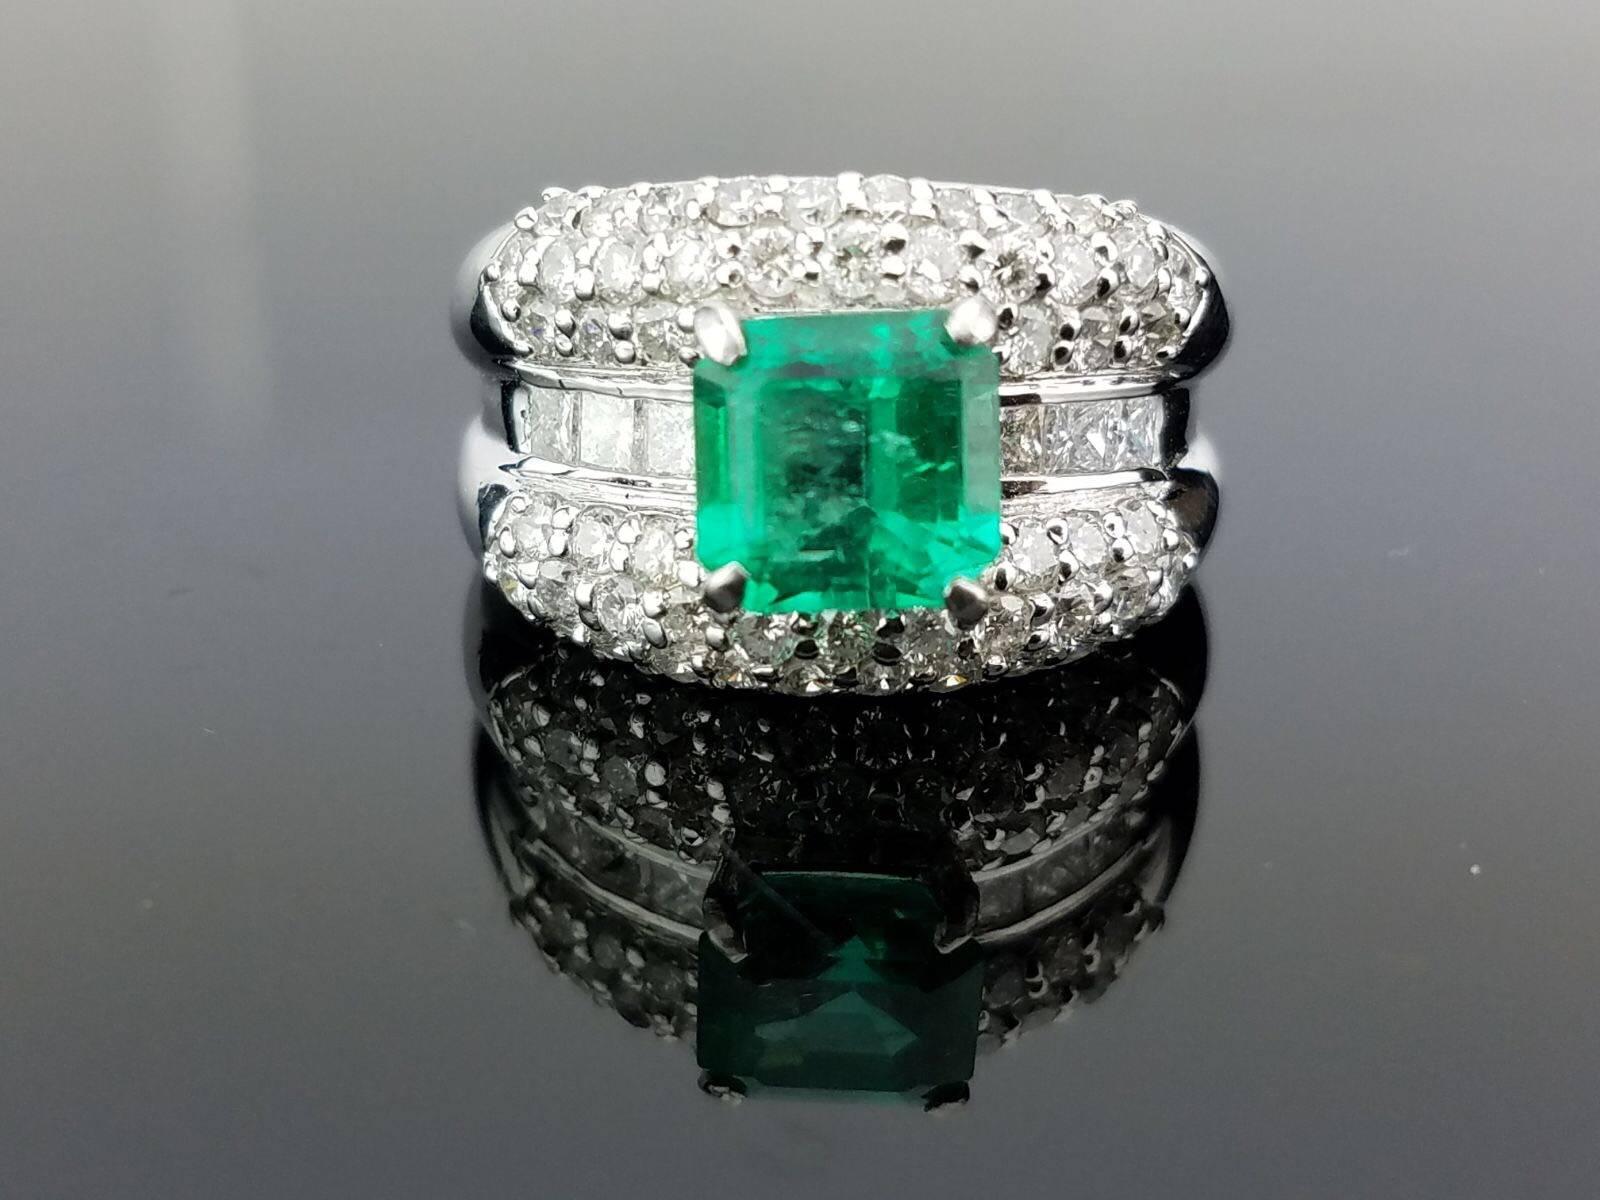 An art-deco looking 1.84 carat Colombian Emerald ring, set with white diamonds in Platinum.

Stone Details: 
Stone: Colombian Emerald
Carat Weight: 1.84 Carats

Diamond Details: 
Total Carat Weight: 1.47 carat
Quality: VS , H/I

Currently a ring